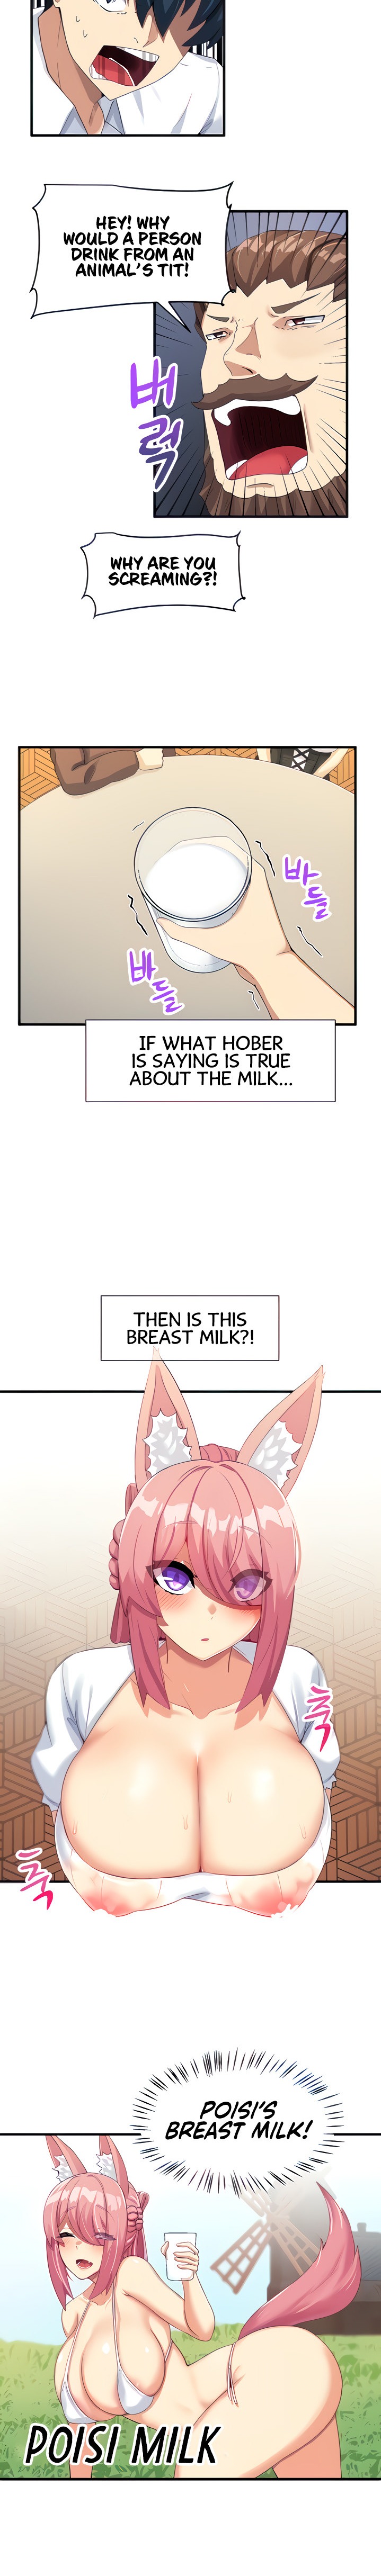 This World’s Breastfeeding Cafe - Chapter 2 Page 5